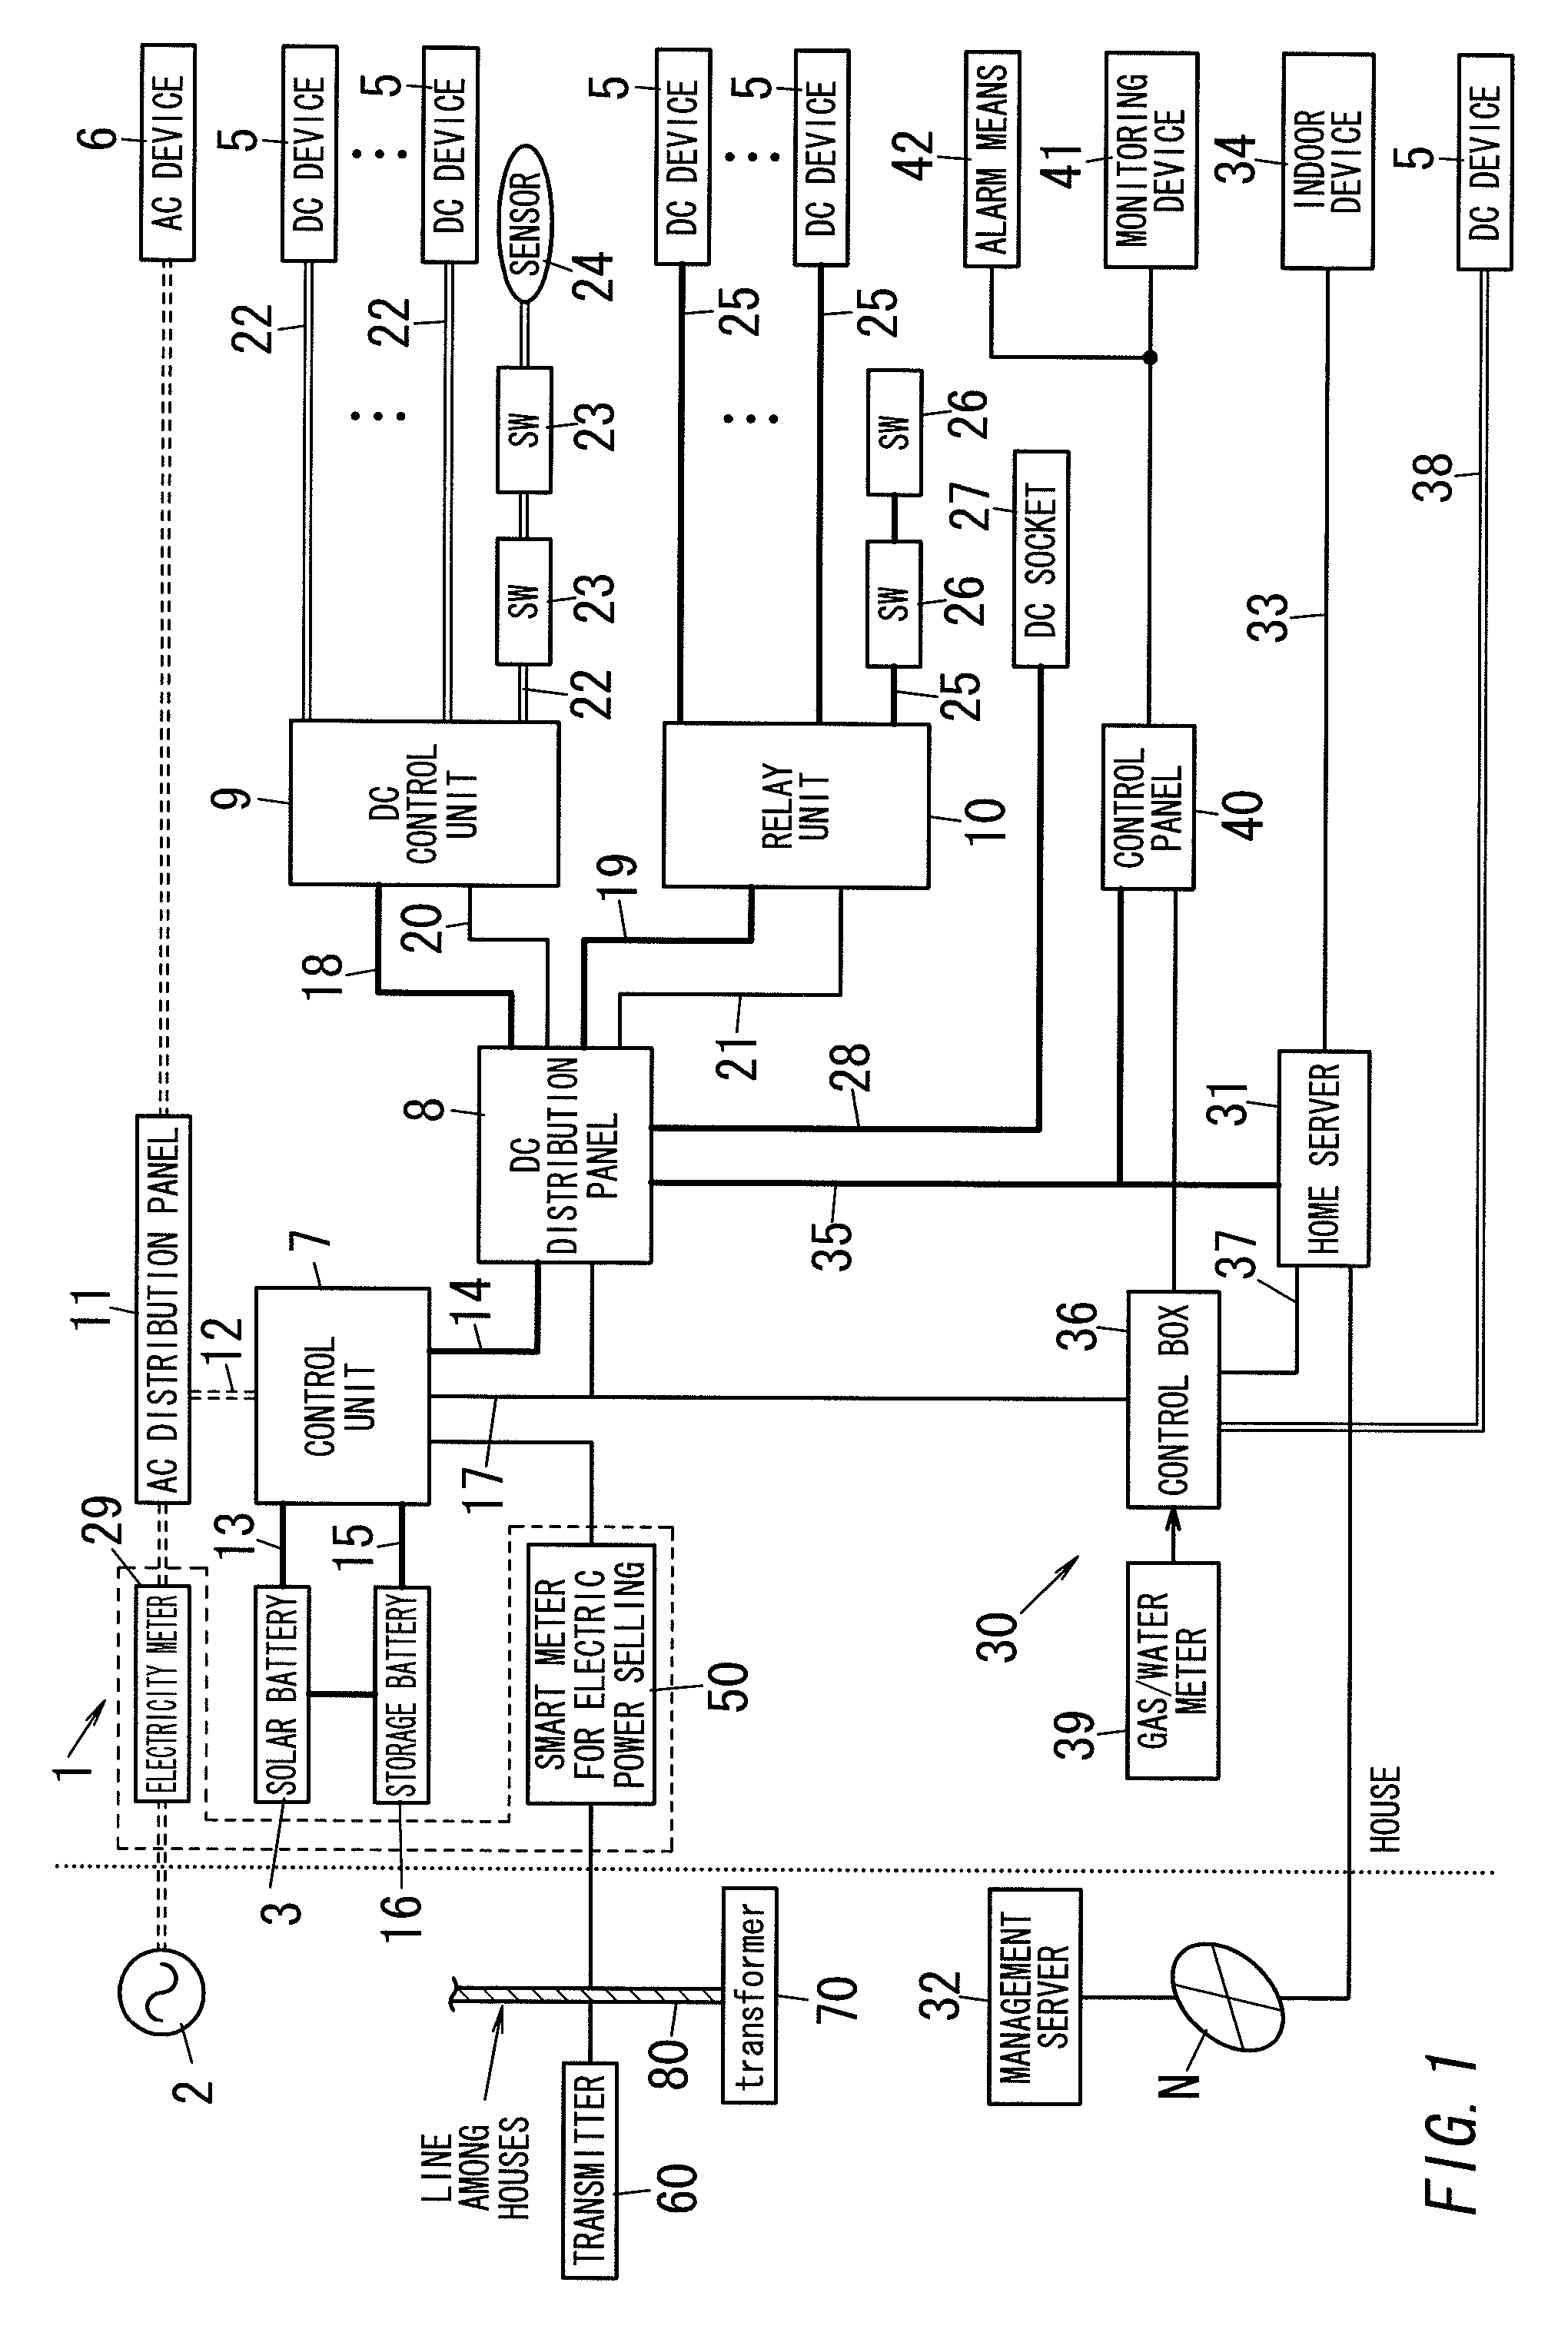 Electric power selling system